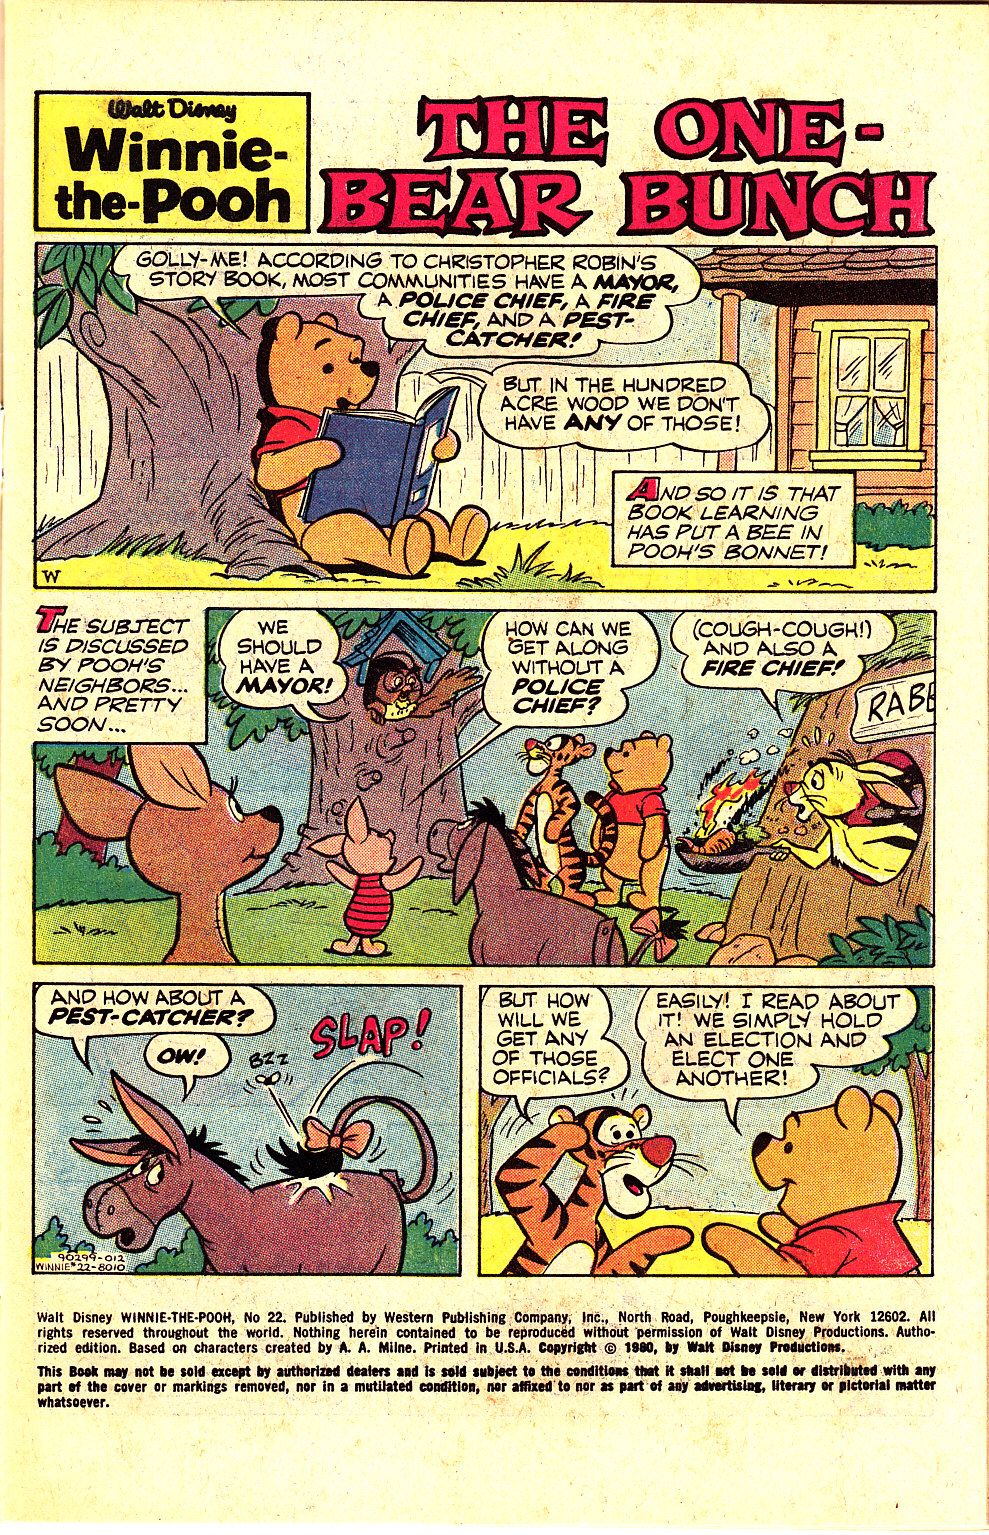 Read online Winnie-the-Pooh comic -  Issue #22 - 3